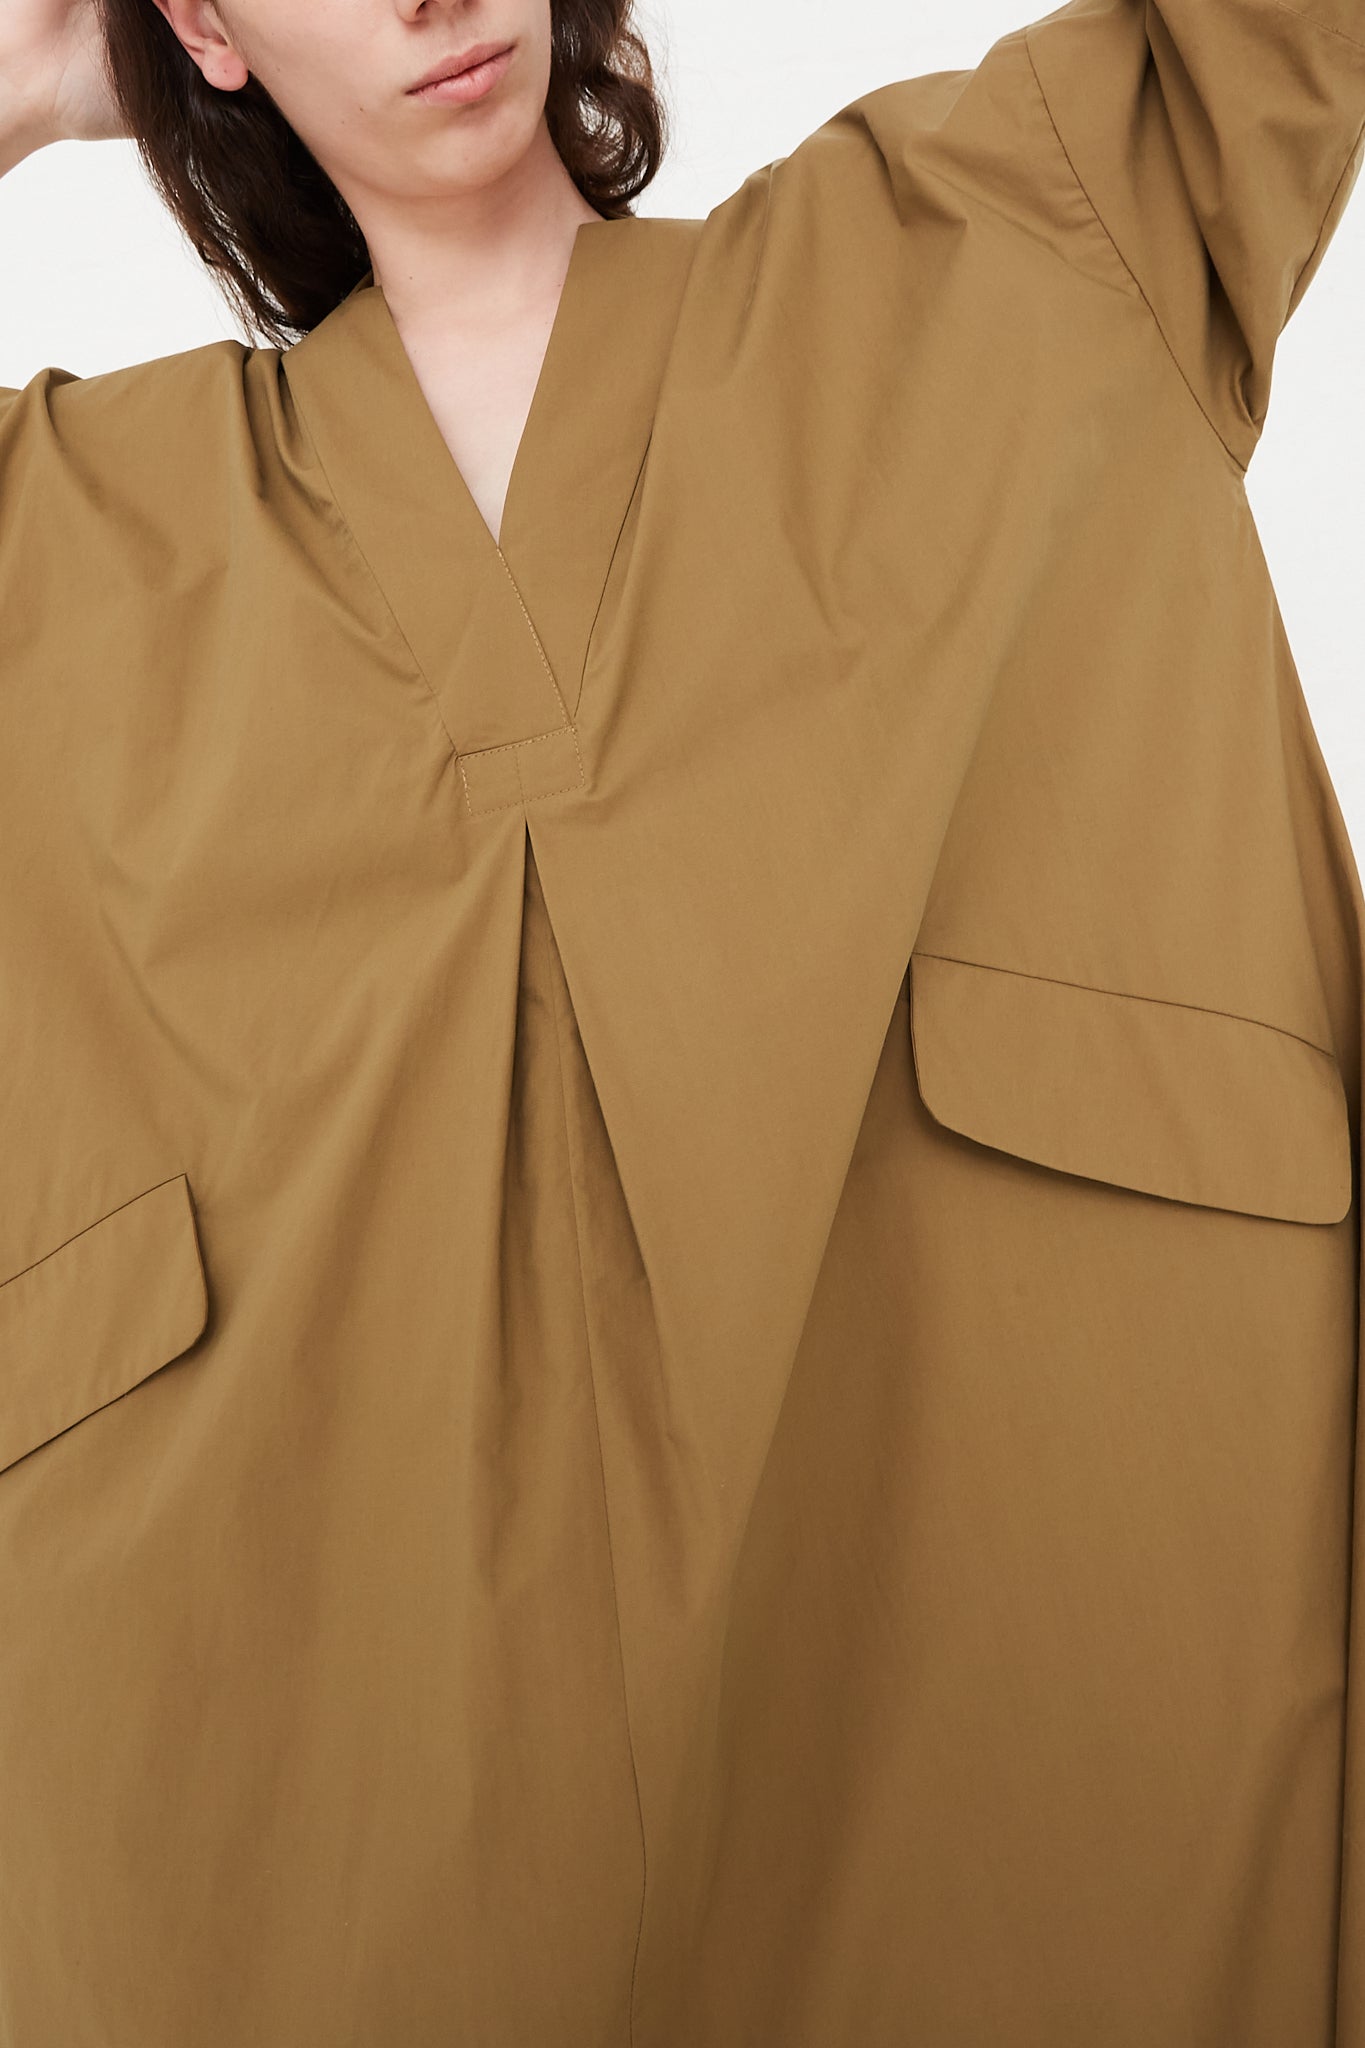 Rachel Comey Copake Dress in Gold front neck opening and flap pocket detail